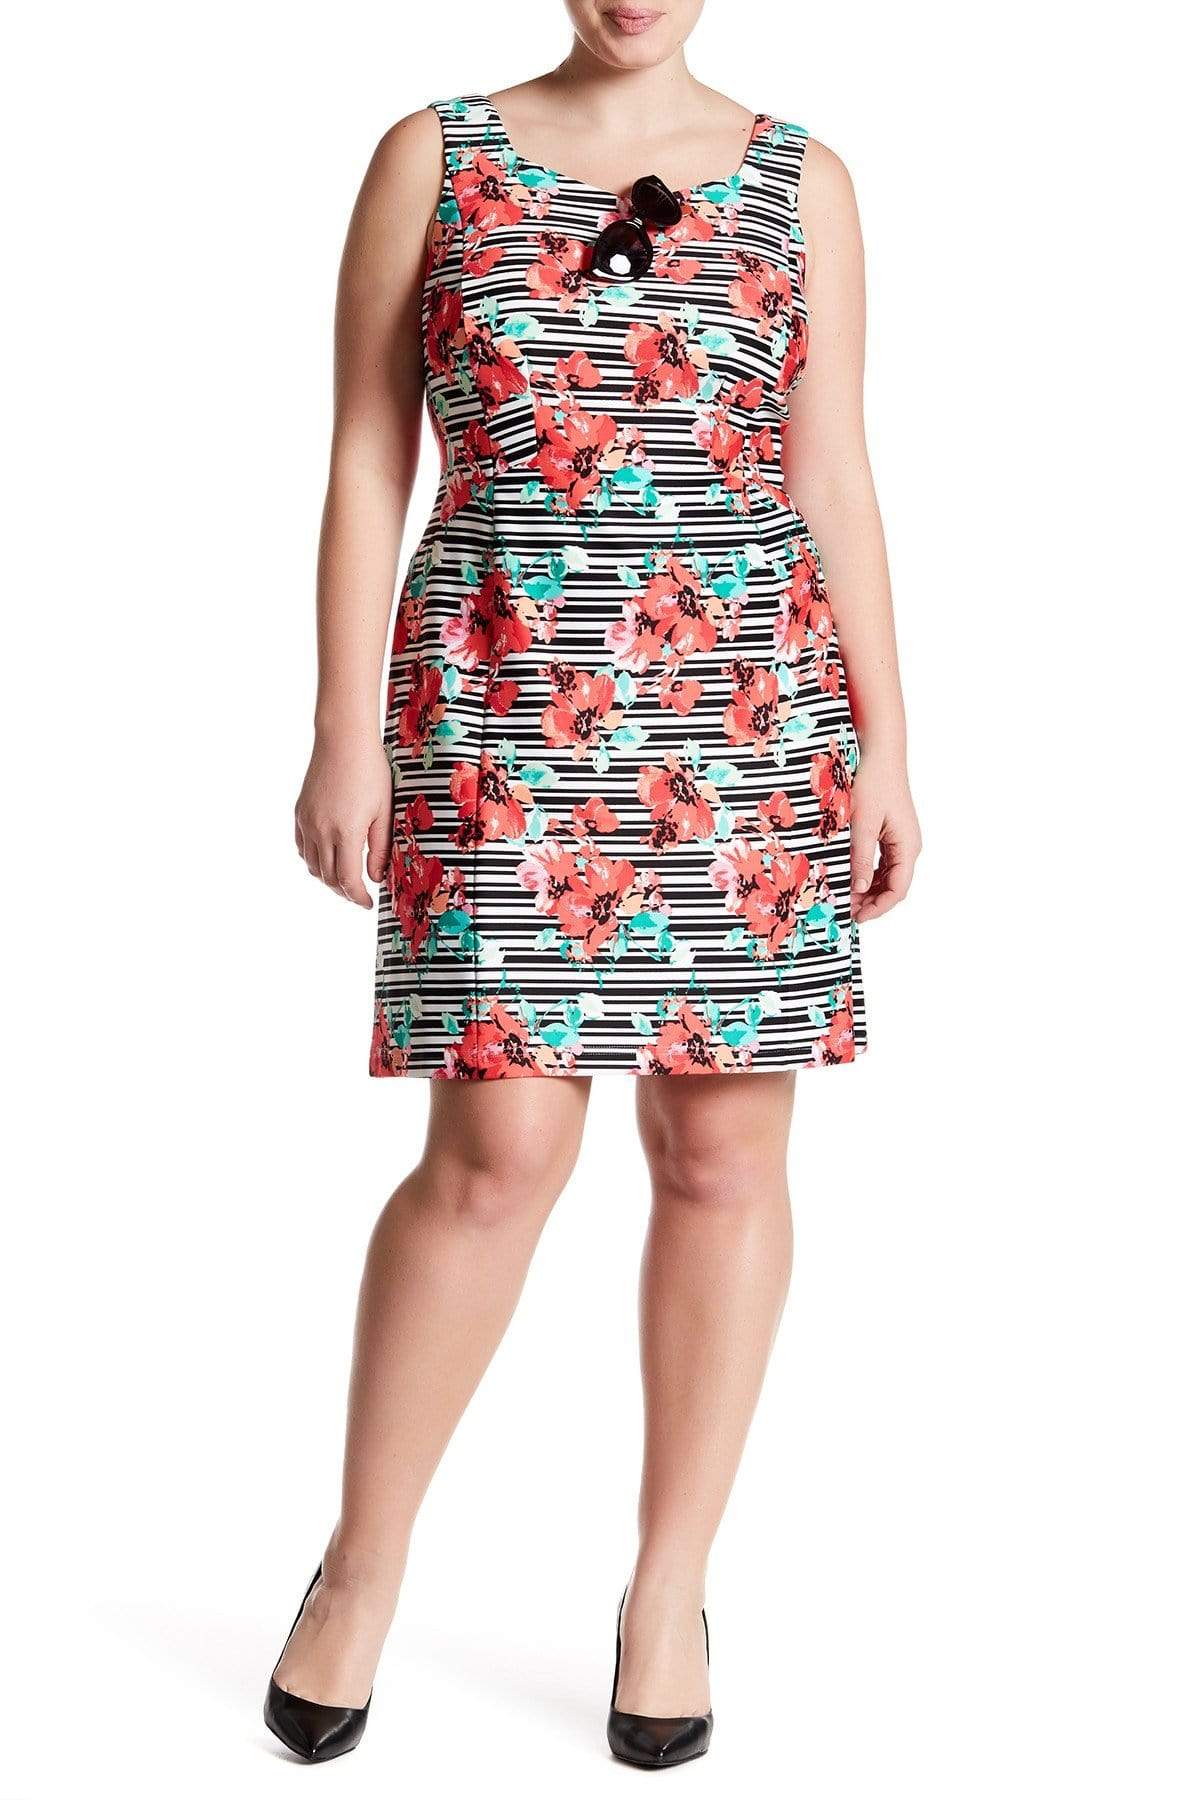 Image of Adrianna Papell - AP1D100873 Floral Striped Sheath Cocktail Dress